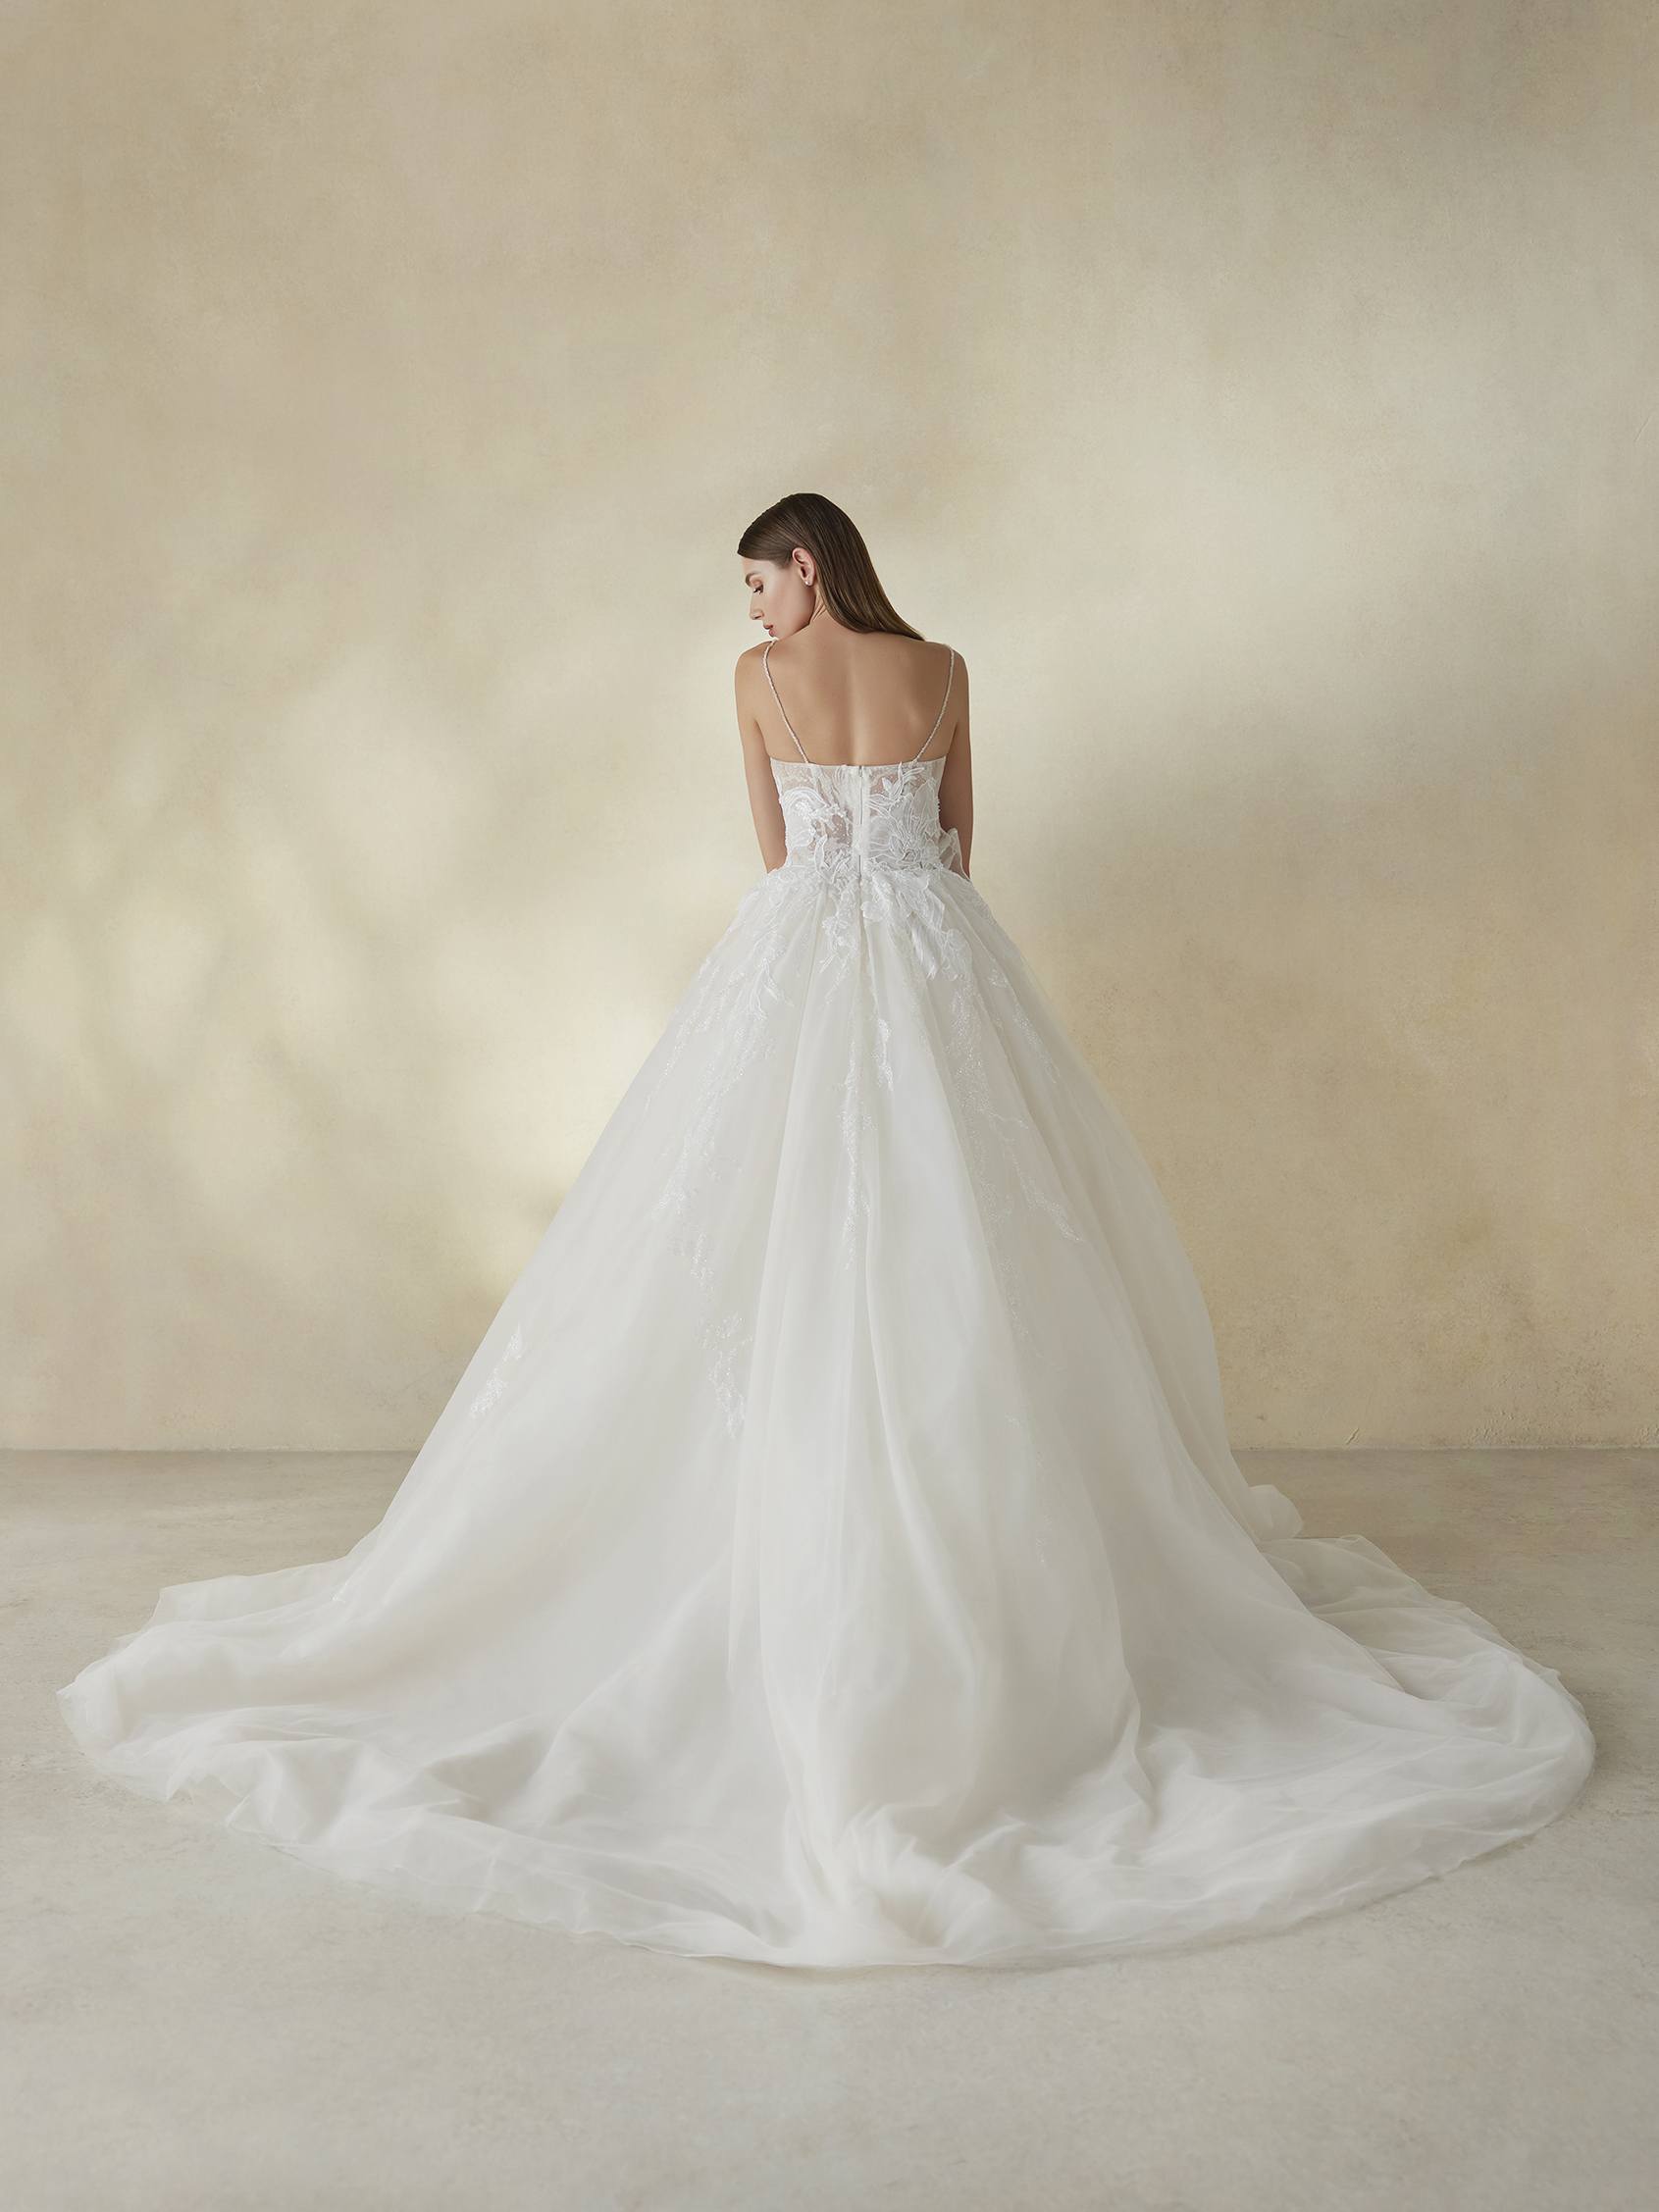 Floral Princess Wedding Dress with Glitter Tulle | Sophia Tolli